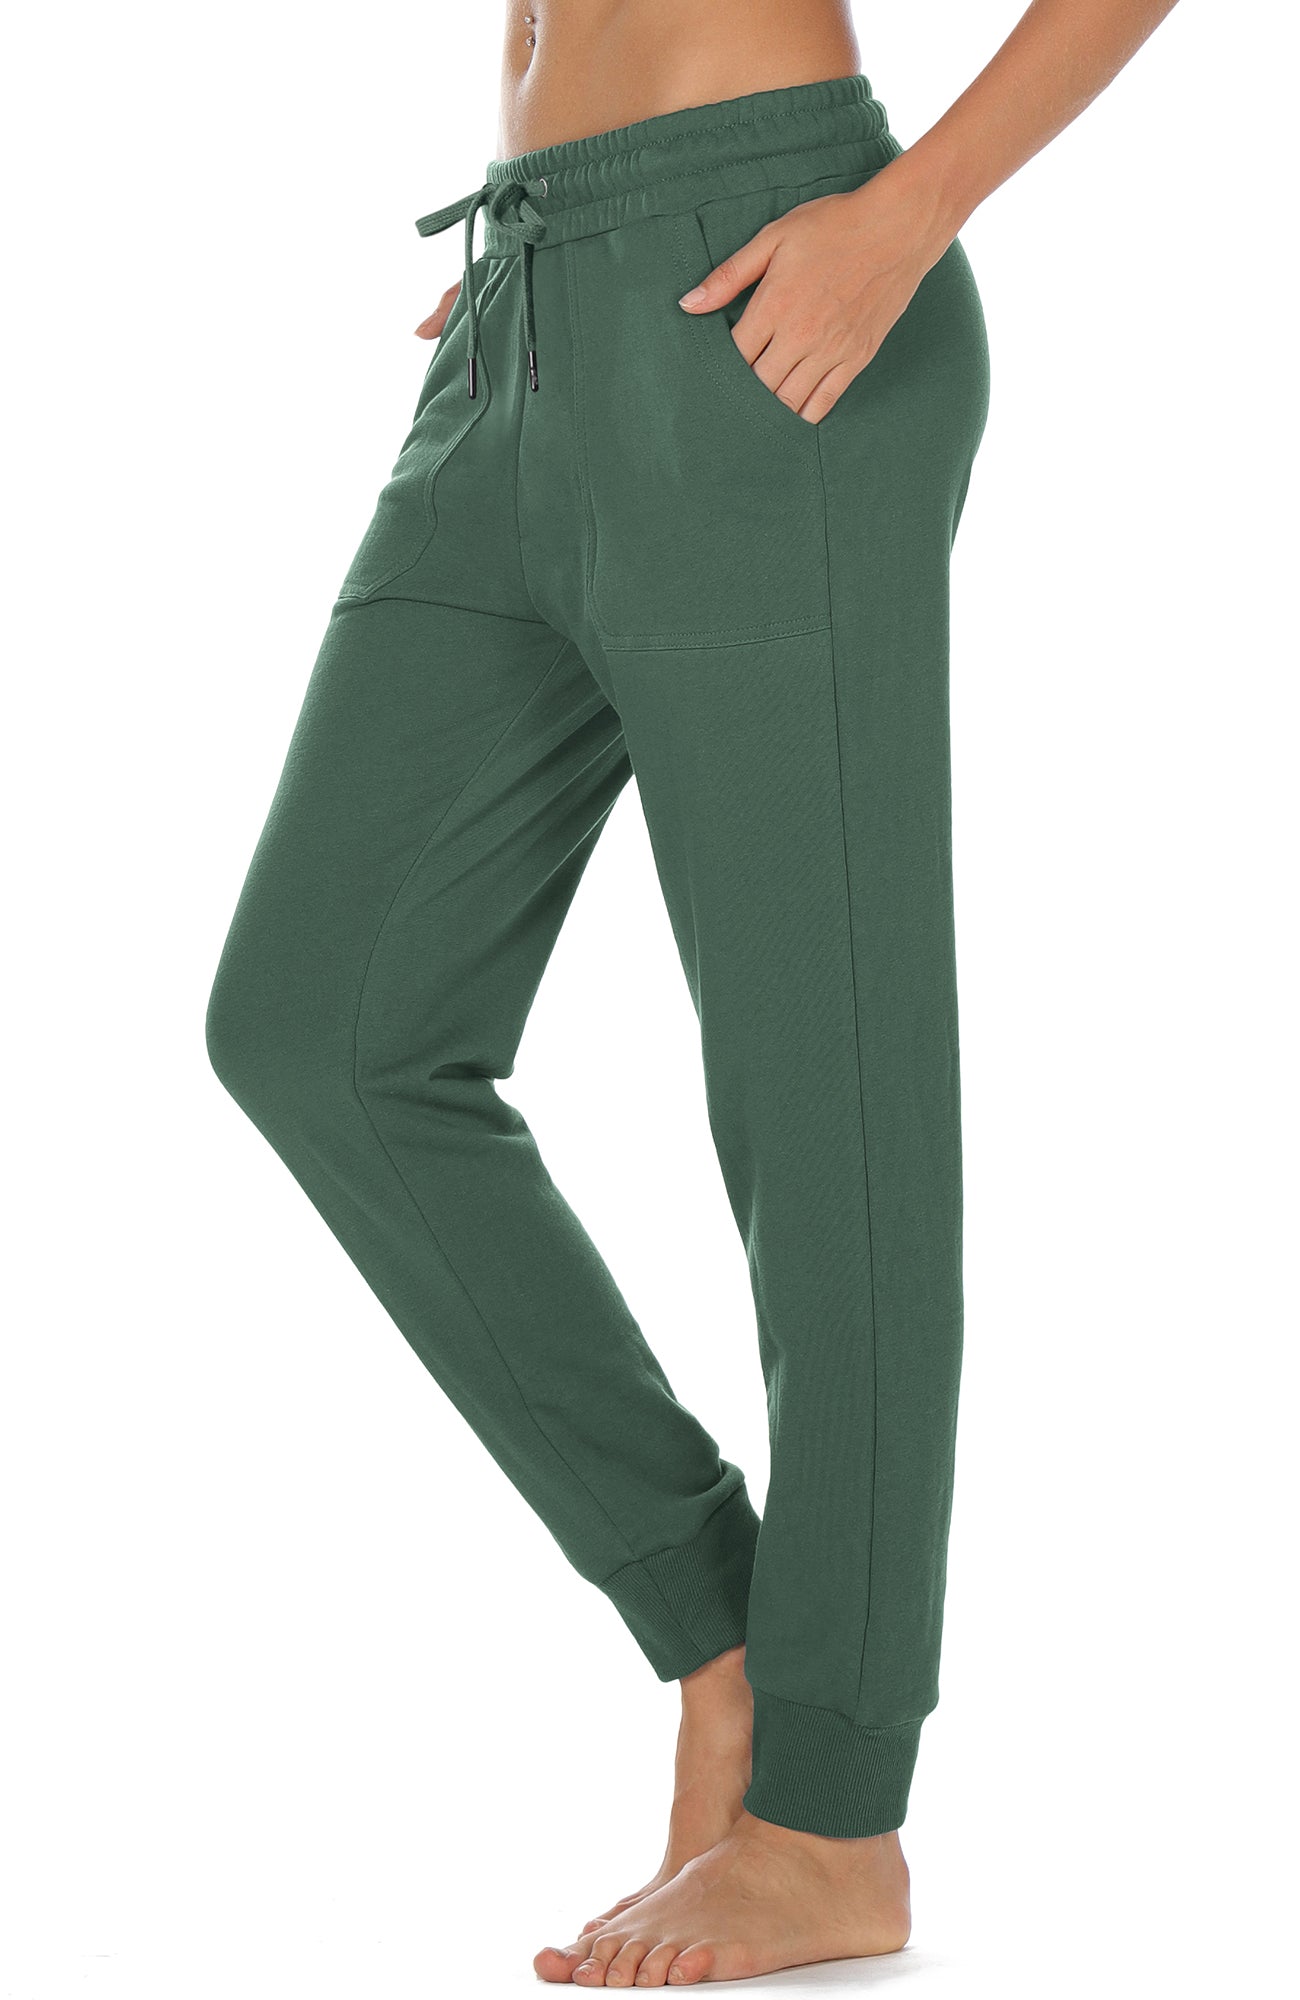  YUCOLEN Workout Pants Women Loose Fit with Pockets Gym Pants  Women Athletic Pants Women Joggers Women Quick Dry Bottom Sweatpants Women  Pants Zipper Pockets Army Green : Clothing, Shoes & Jewelry